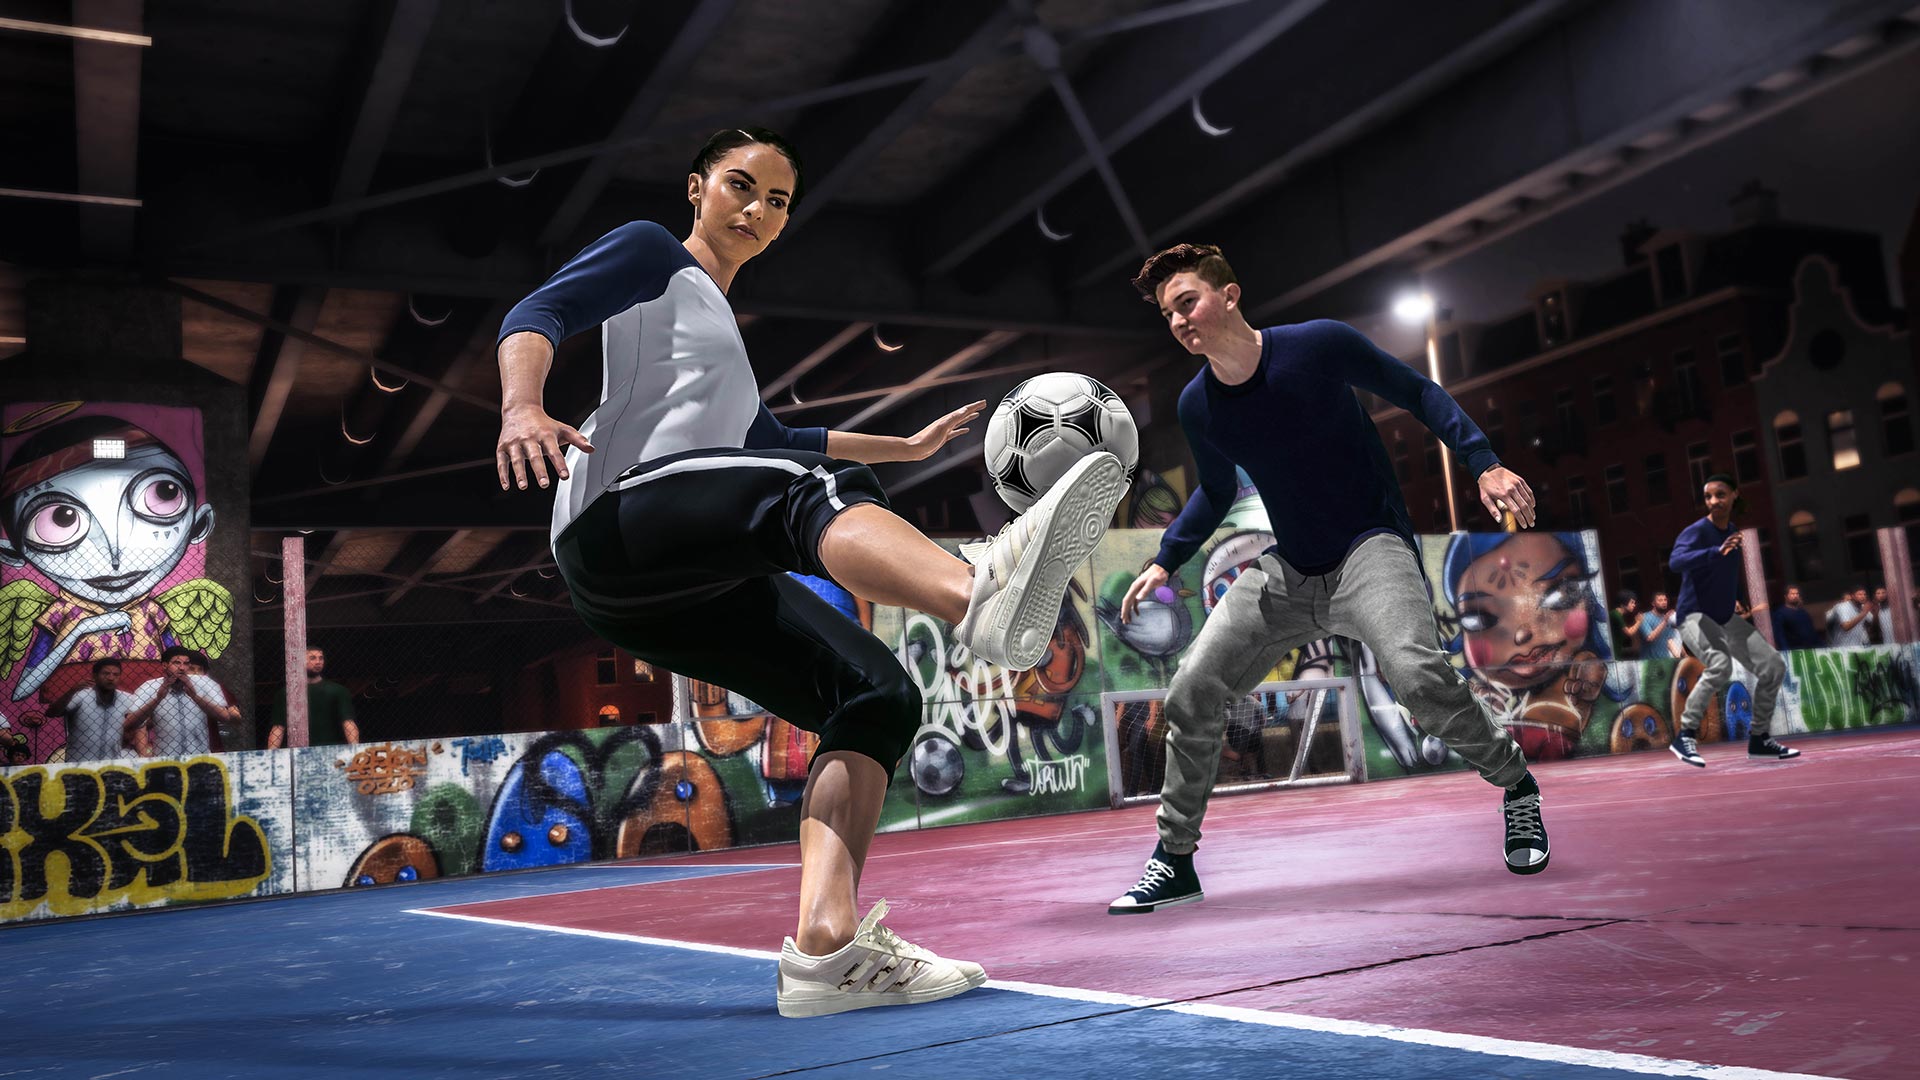 EA, EA Sports, EA SPORTS FIFA 20, EA SPORTS FIFA 20 Review, Electronic Arts, FIFA 20, FIFA 20 Review, Football, PS4, PS4 Review, Rating 7/10, simulation, soccer, Sports, Team-Based